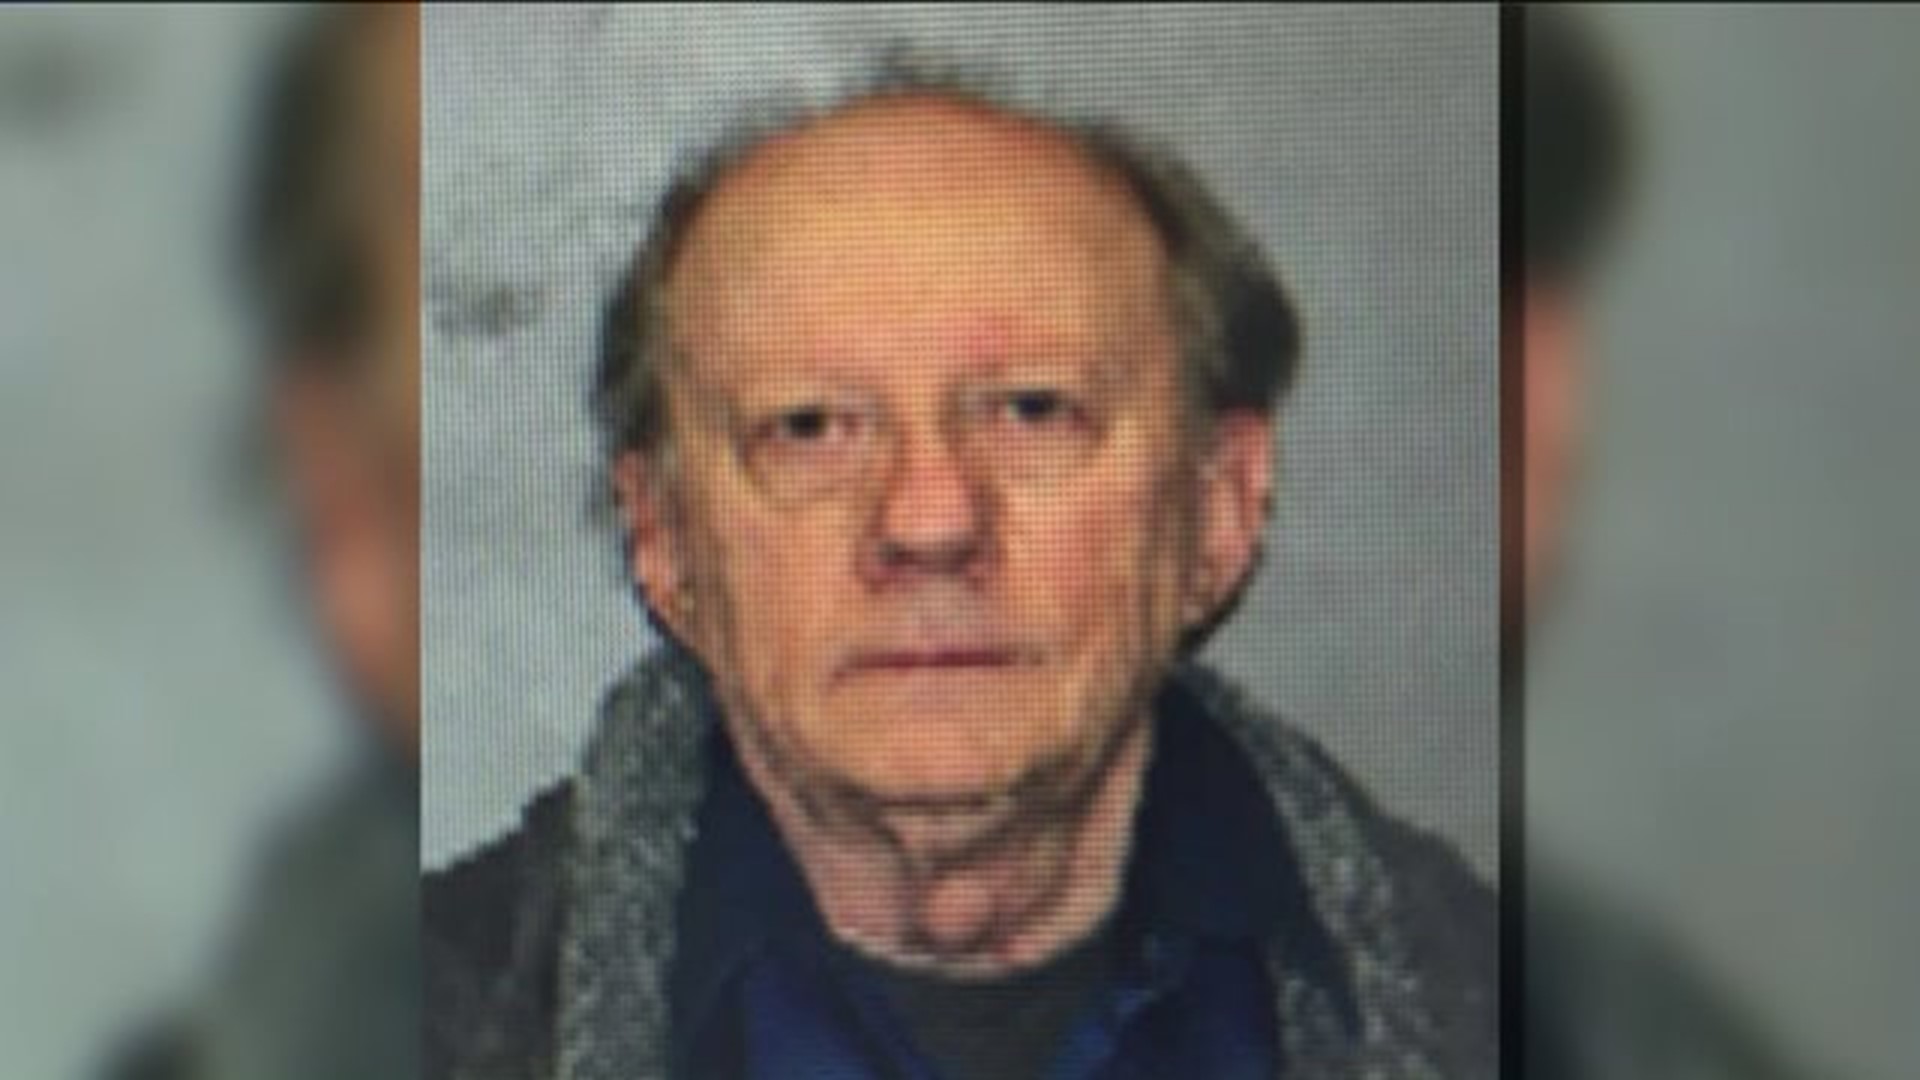 Former clergy member charged with child pornography